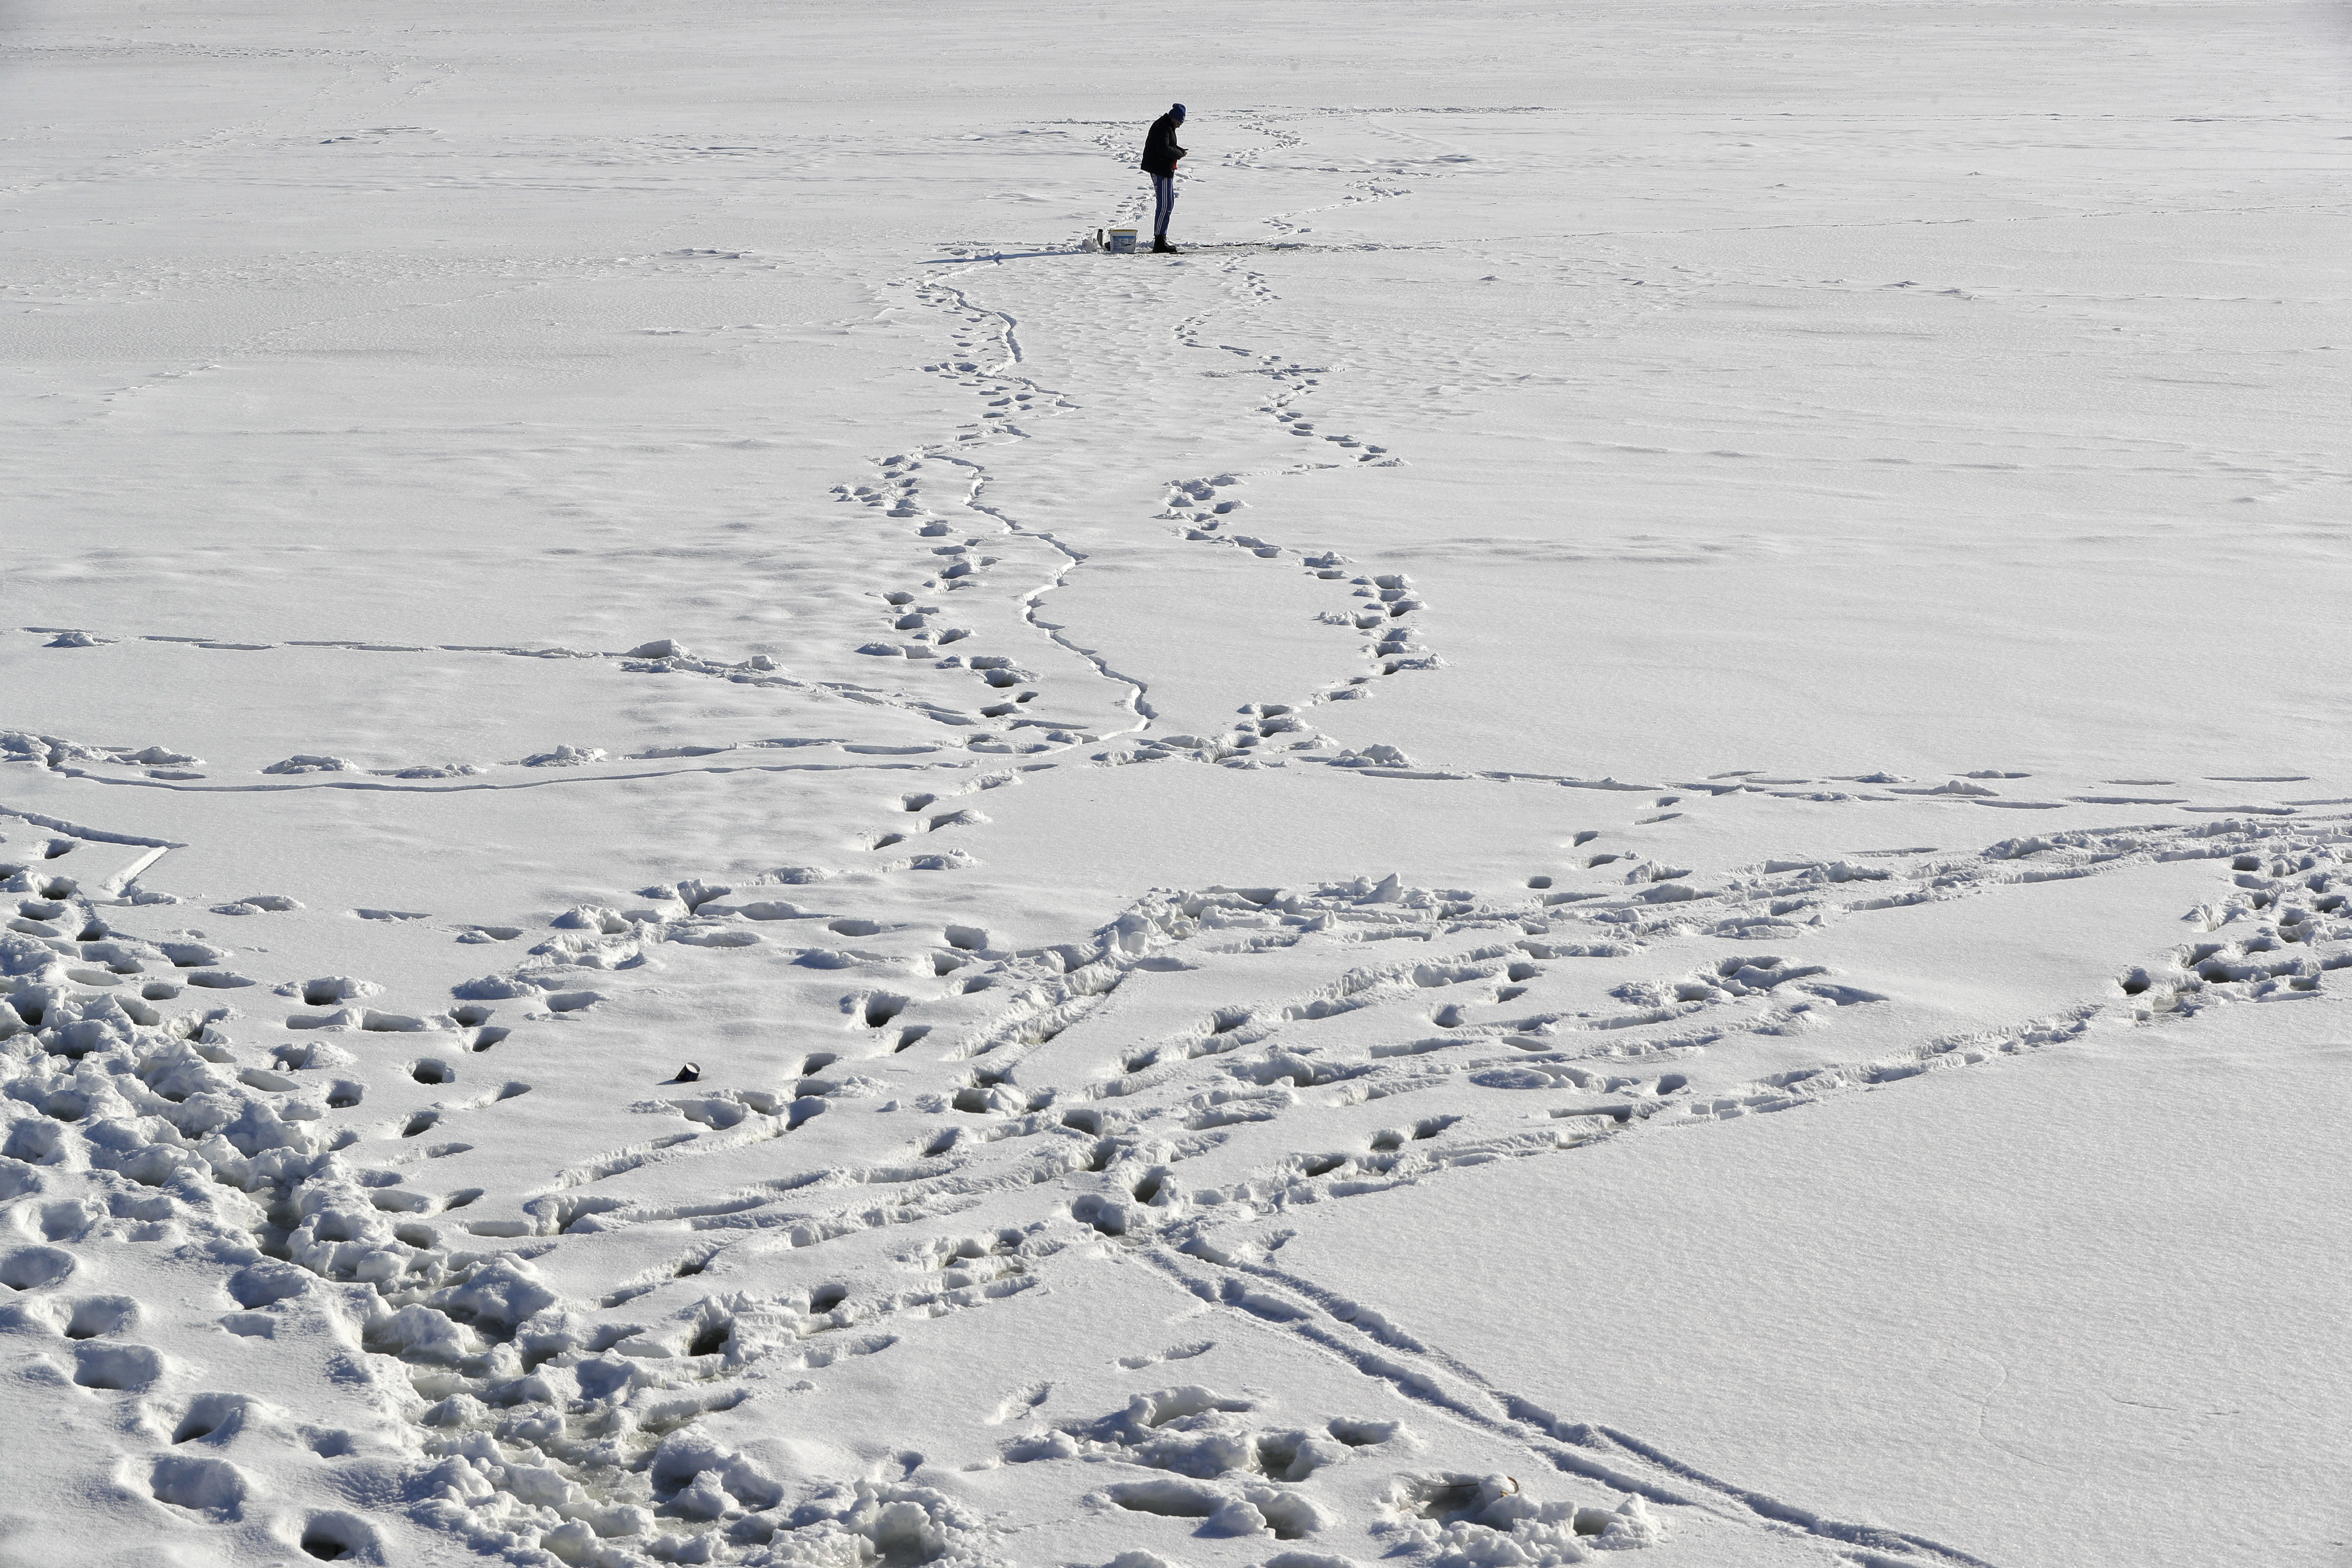 A man fishes on a frozen lake on the outskirts of Bucharest, Romania, Friday, Jan. 13, 2017. The Romanian capital experienced milder weather after a week of blizzards and extreme cold that caused a major disruption of the road and railway transport.(AP Photo/Vadim Ghirda)